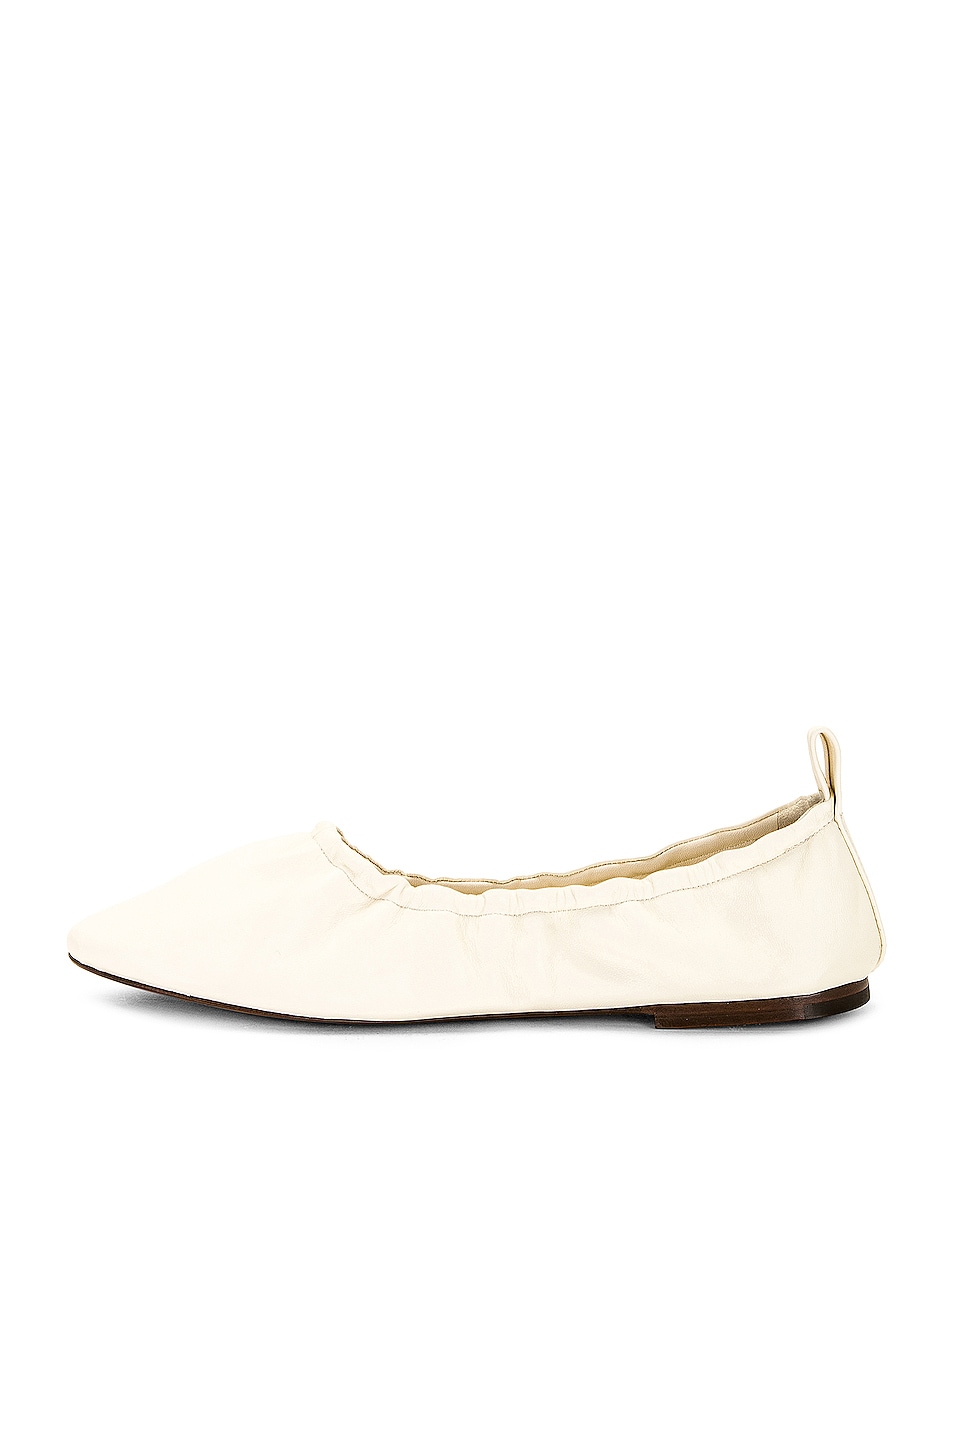 The Row Glove Ballet Flat in Ivory | FWRD